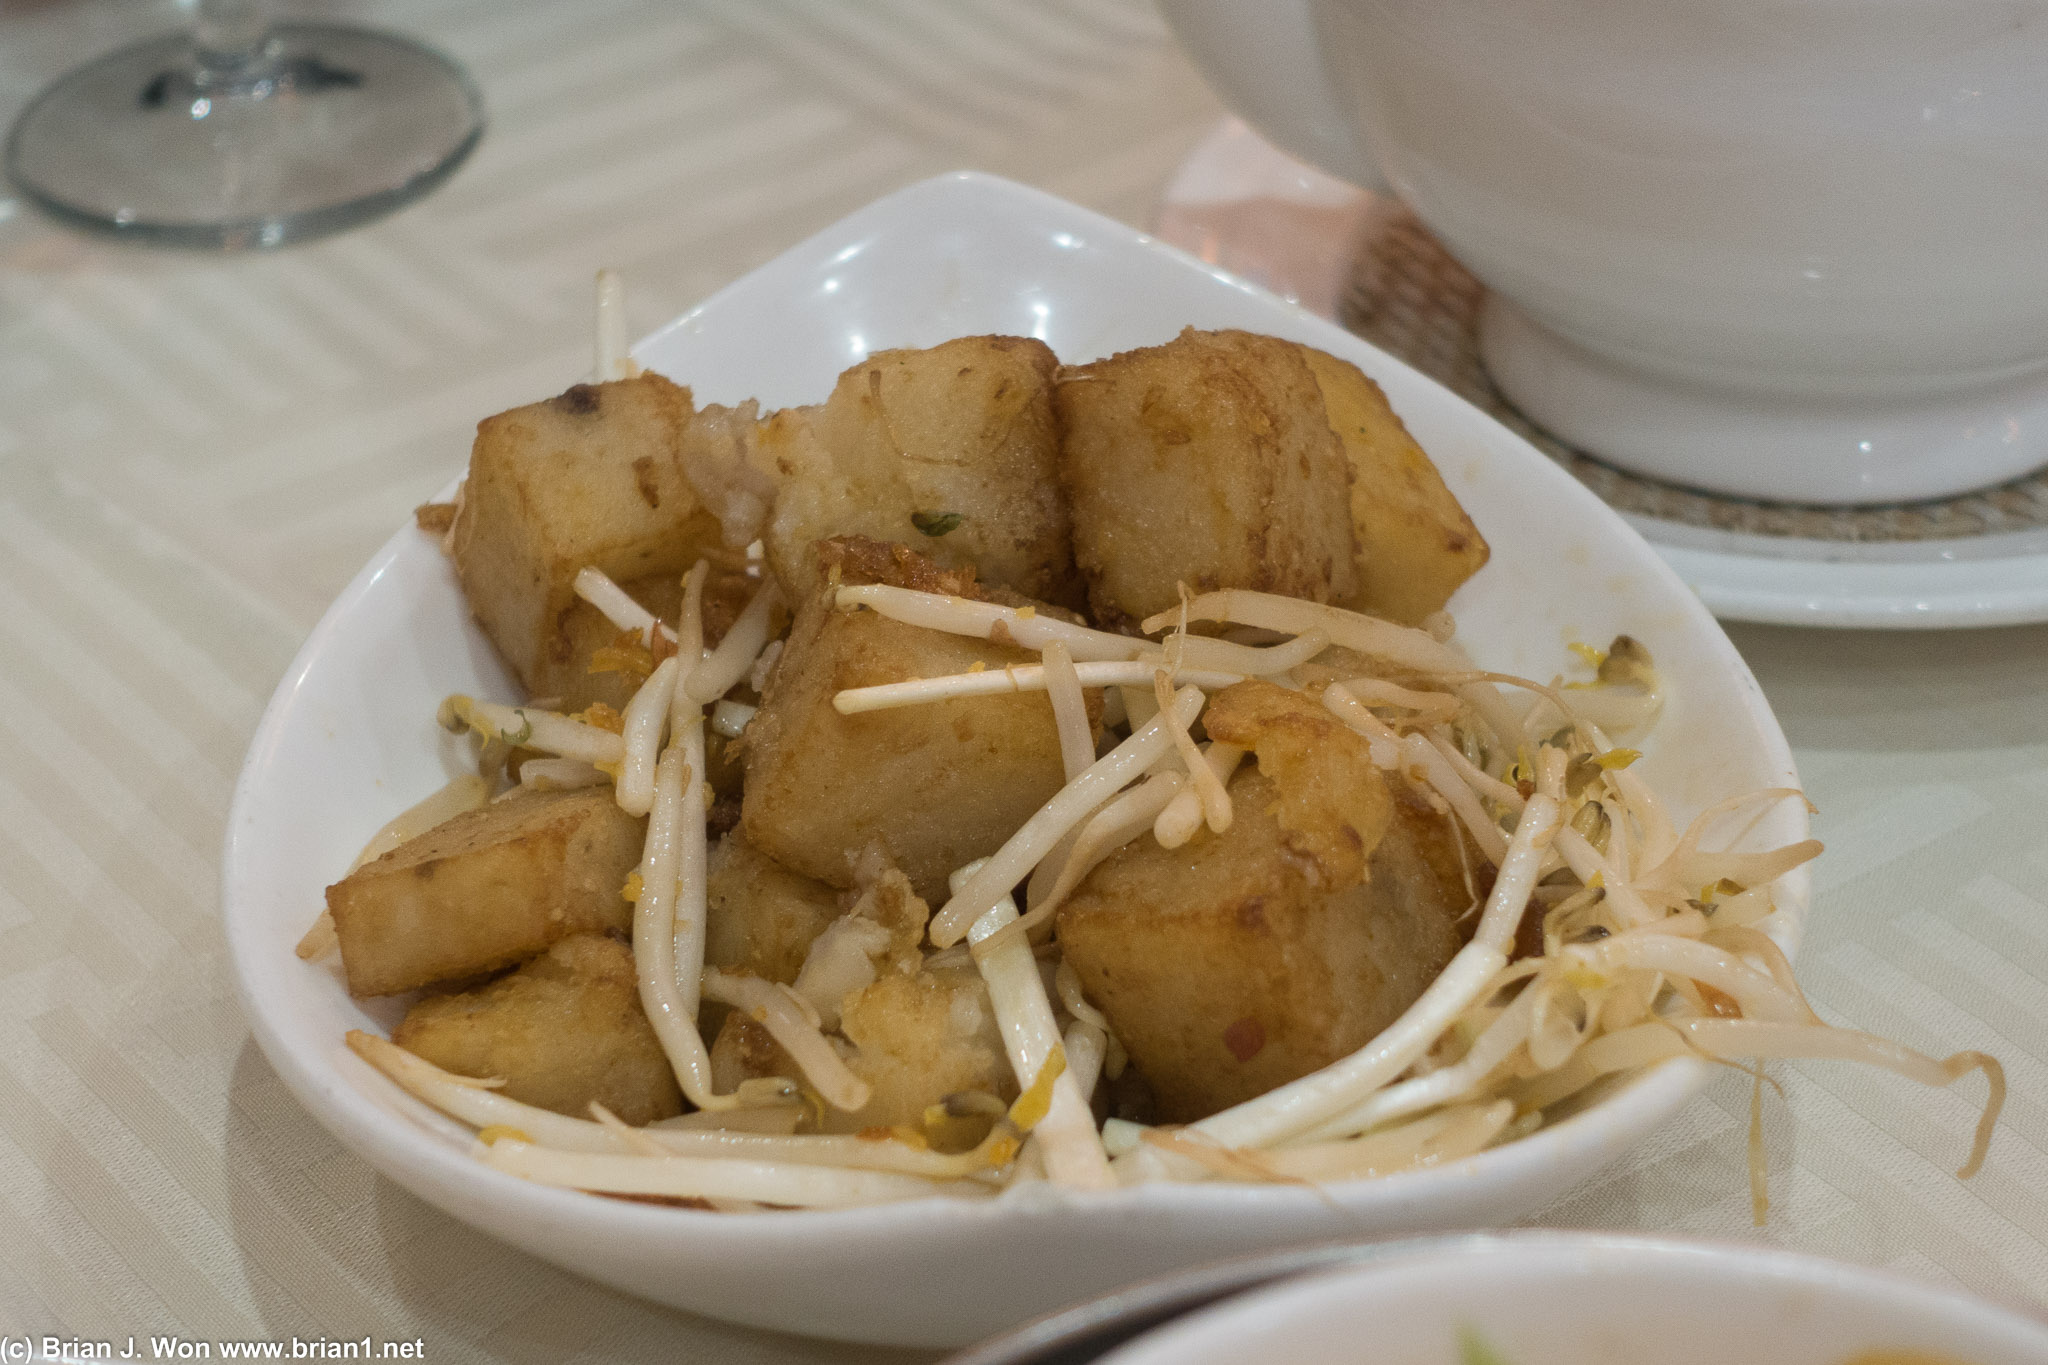 Lo bac guo was cubed. Quite different as a result-- less greasy. Pretty good but you still gotta eat it piping hot.